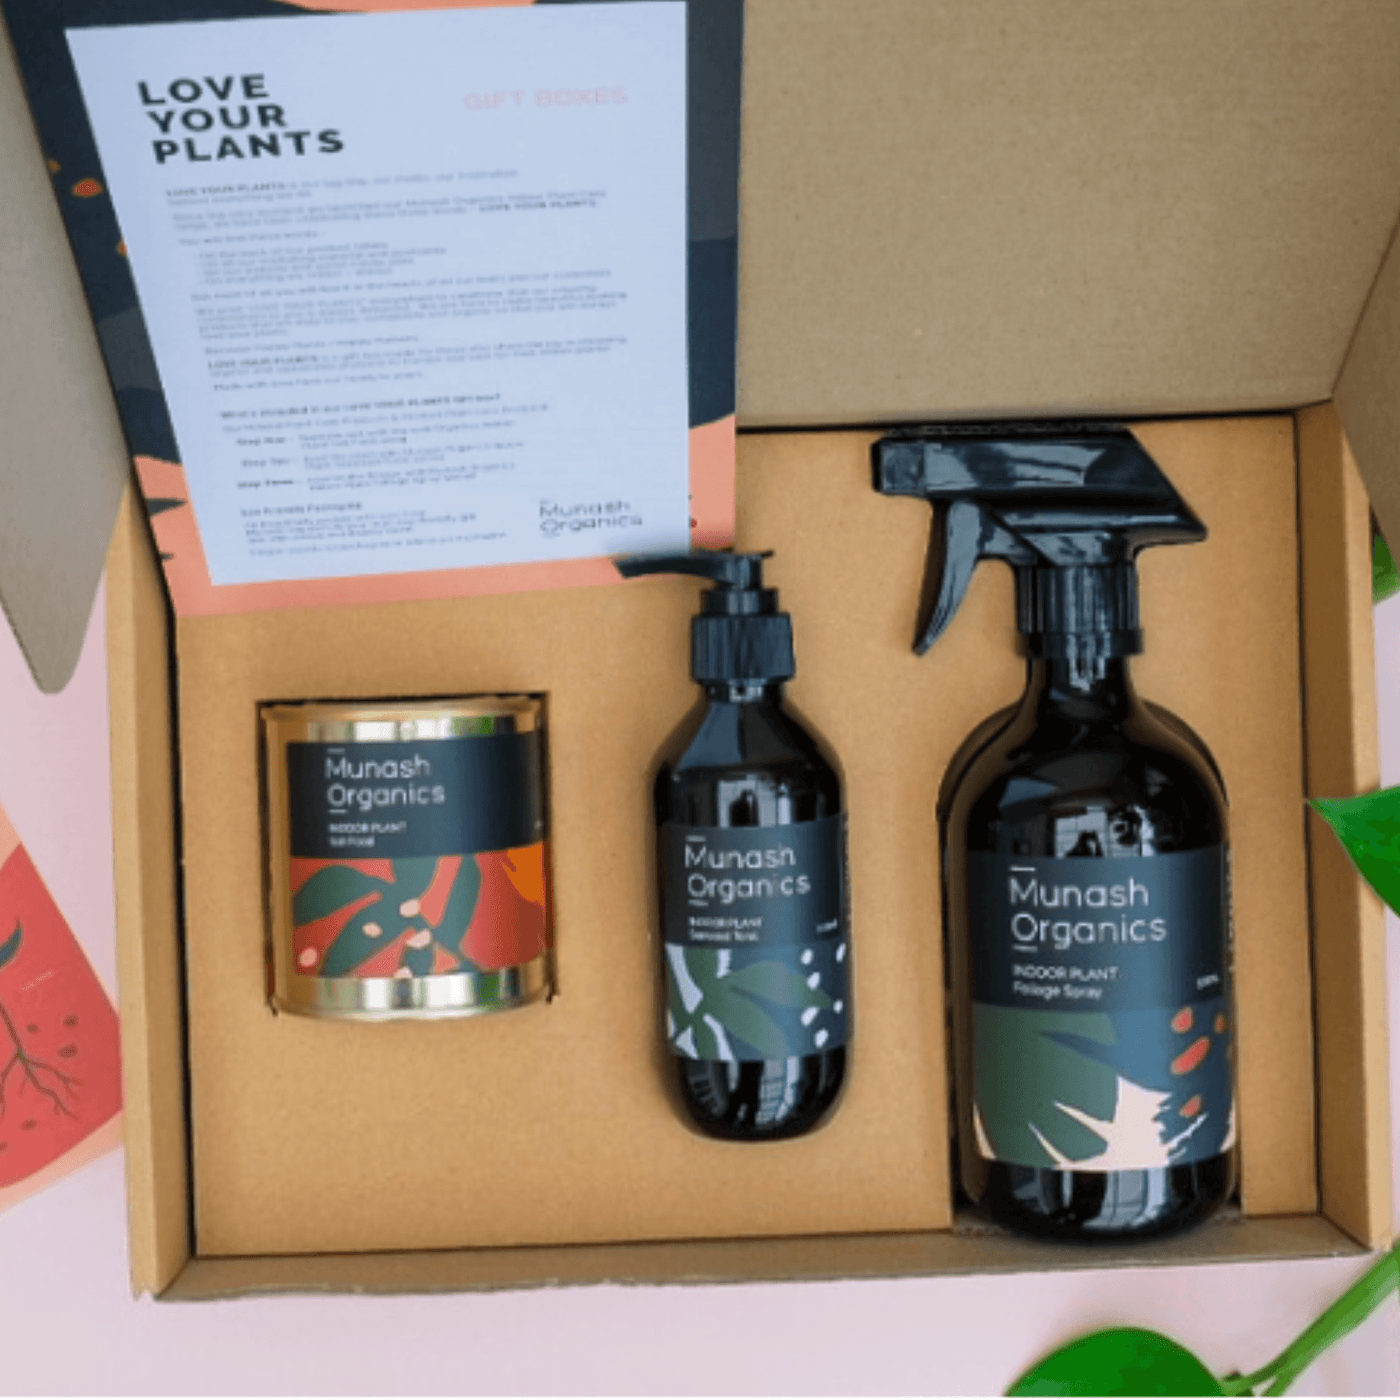 Munash Love Your Plants Gift Pack